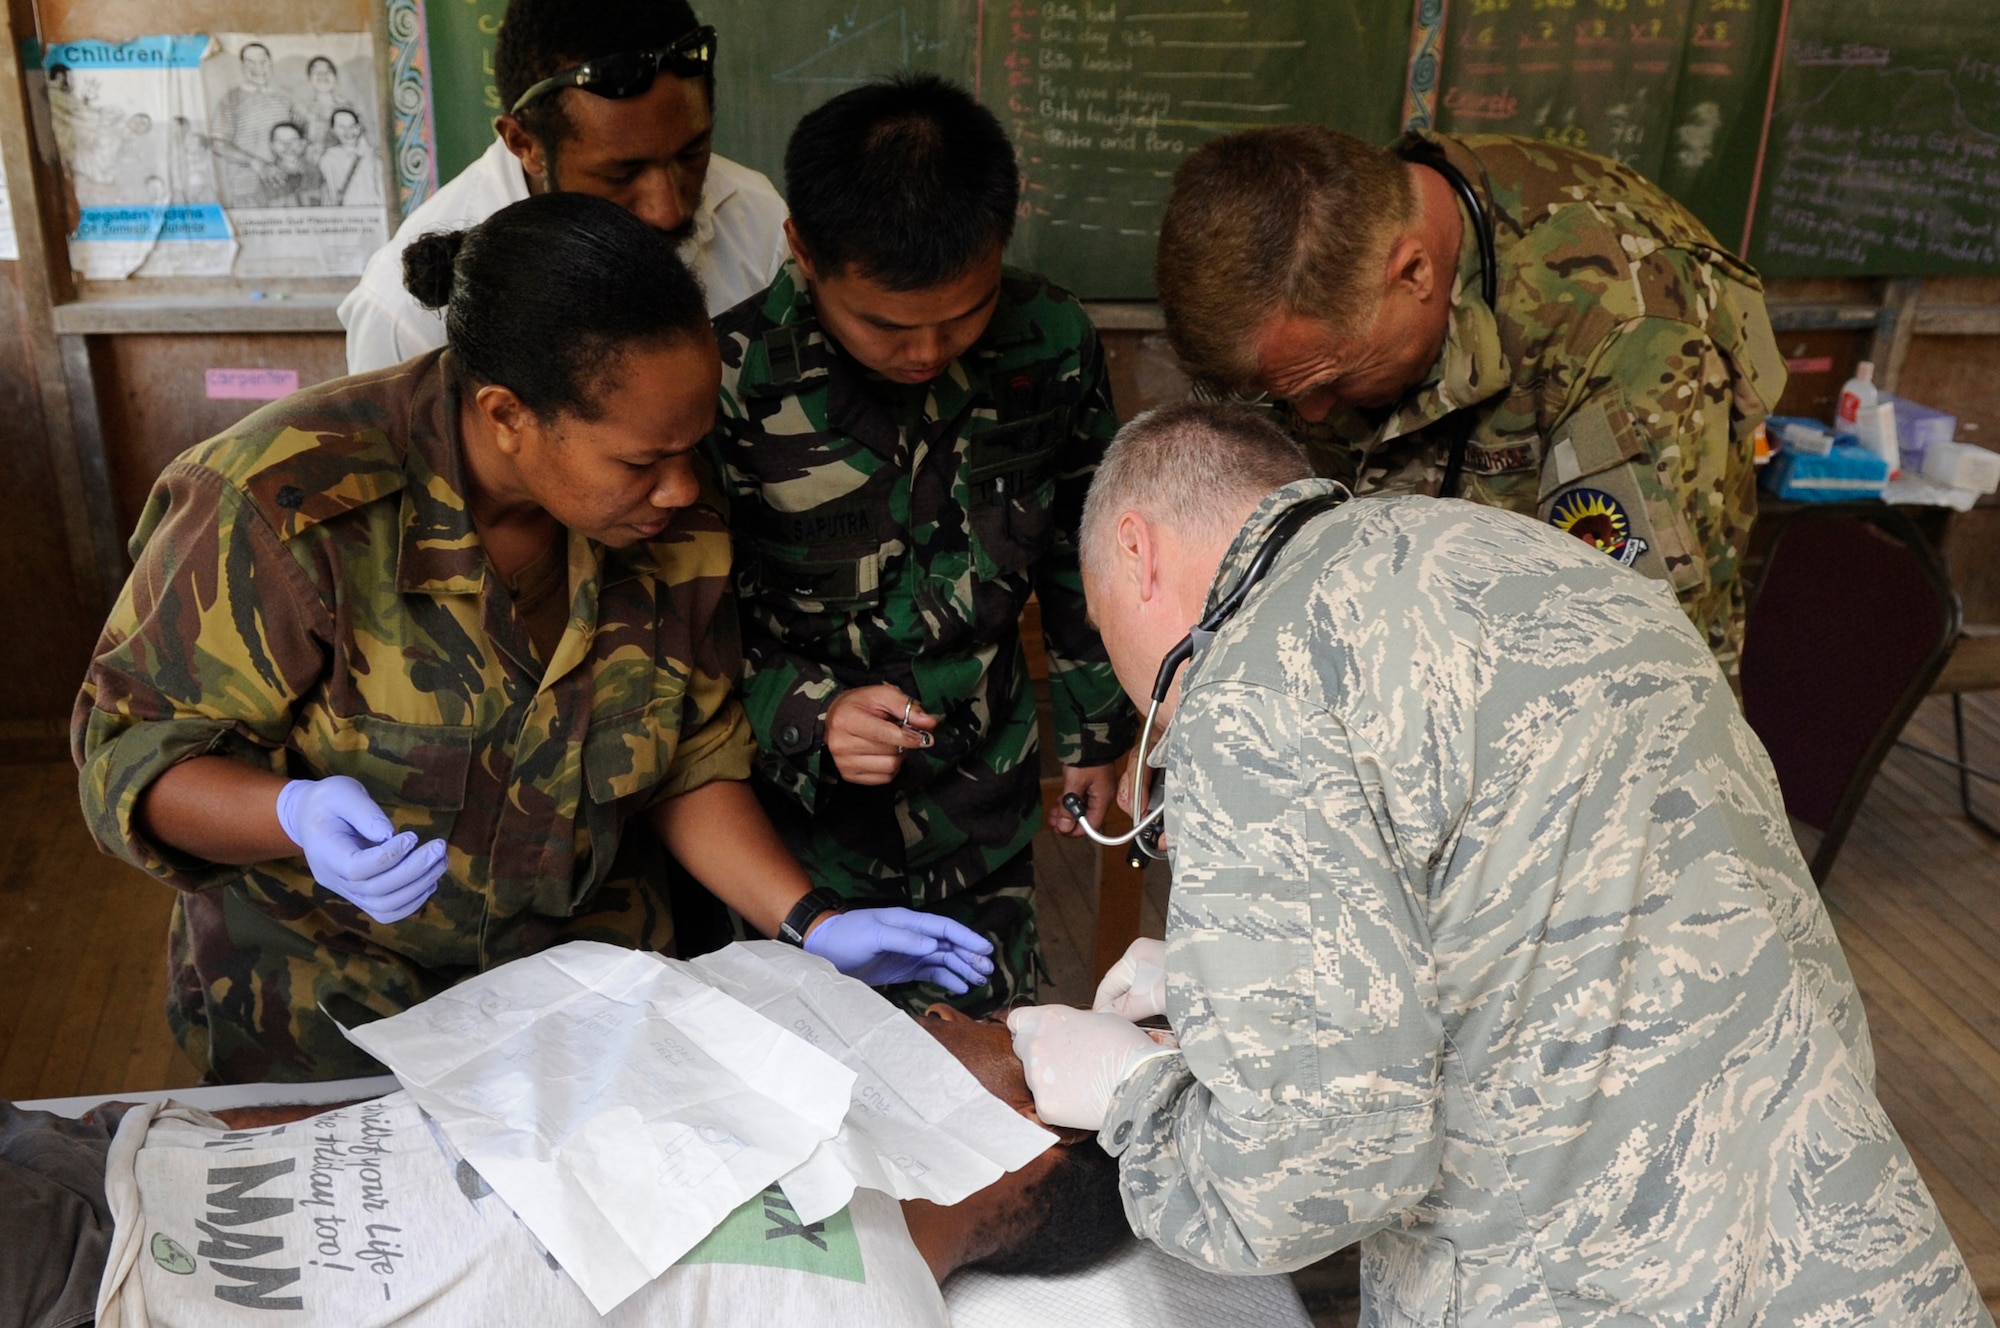 Lt. Col. Jeffrey Freeland, the Pacific Air Forces chief of aerospace medicine from Joint Base Pearl Harbor-Hickam, Hawaii, removes a fatty tumor from a local man’s head while medical professionals from Papua New Guinea, Indonesia and the U.S. Air National Guard assist during Pacific Angel 15-4 at Unggai Primary School in Papua New Guinea, June 1, 2015. The medical team treated 514 patients by the end of their first day and reached a total of 2,000 patients treated in their three-day stay at their first health services outreach location. The mission of PACANGEL is to upgrade education and health facilities in the area, as well as, work to deepen local disaster response capabilities. (U.S. Air Force photo/Staff Sgt. Marcus Morris)